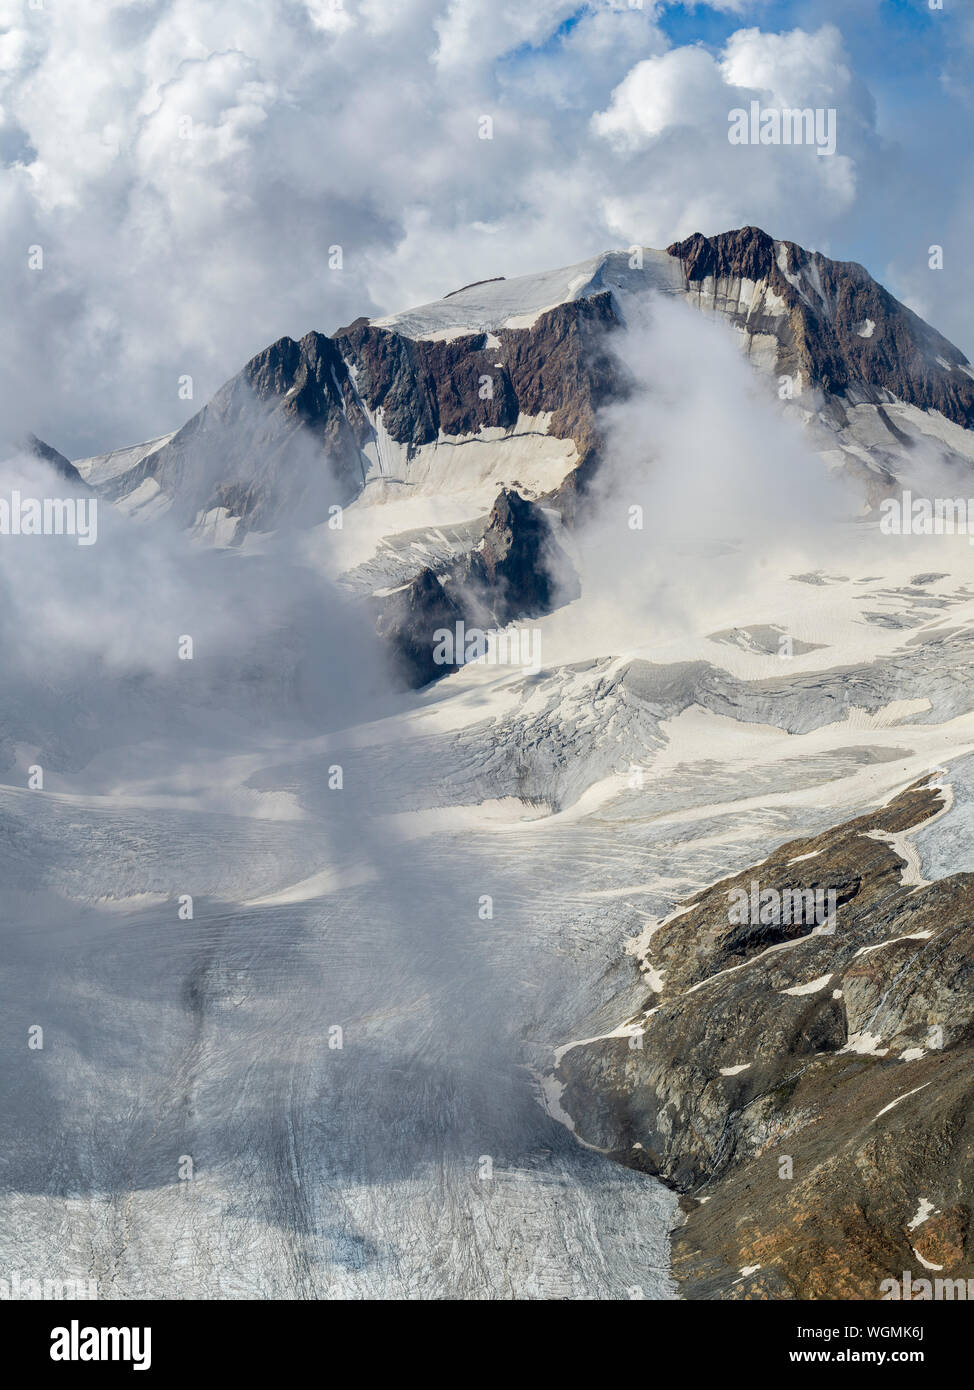 Mountain top view of Glacier Senales partly covered in clouds Stock Photo